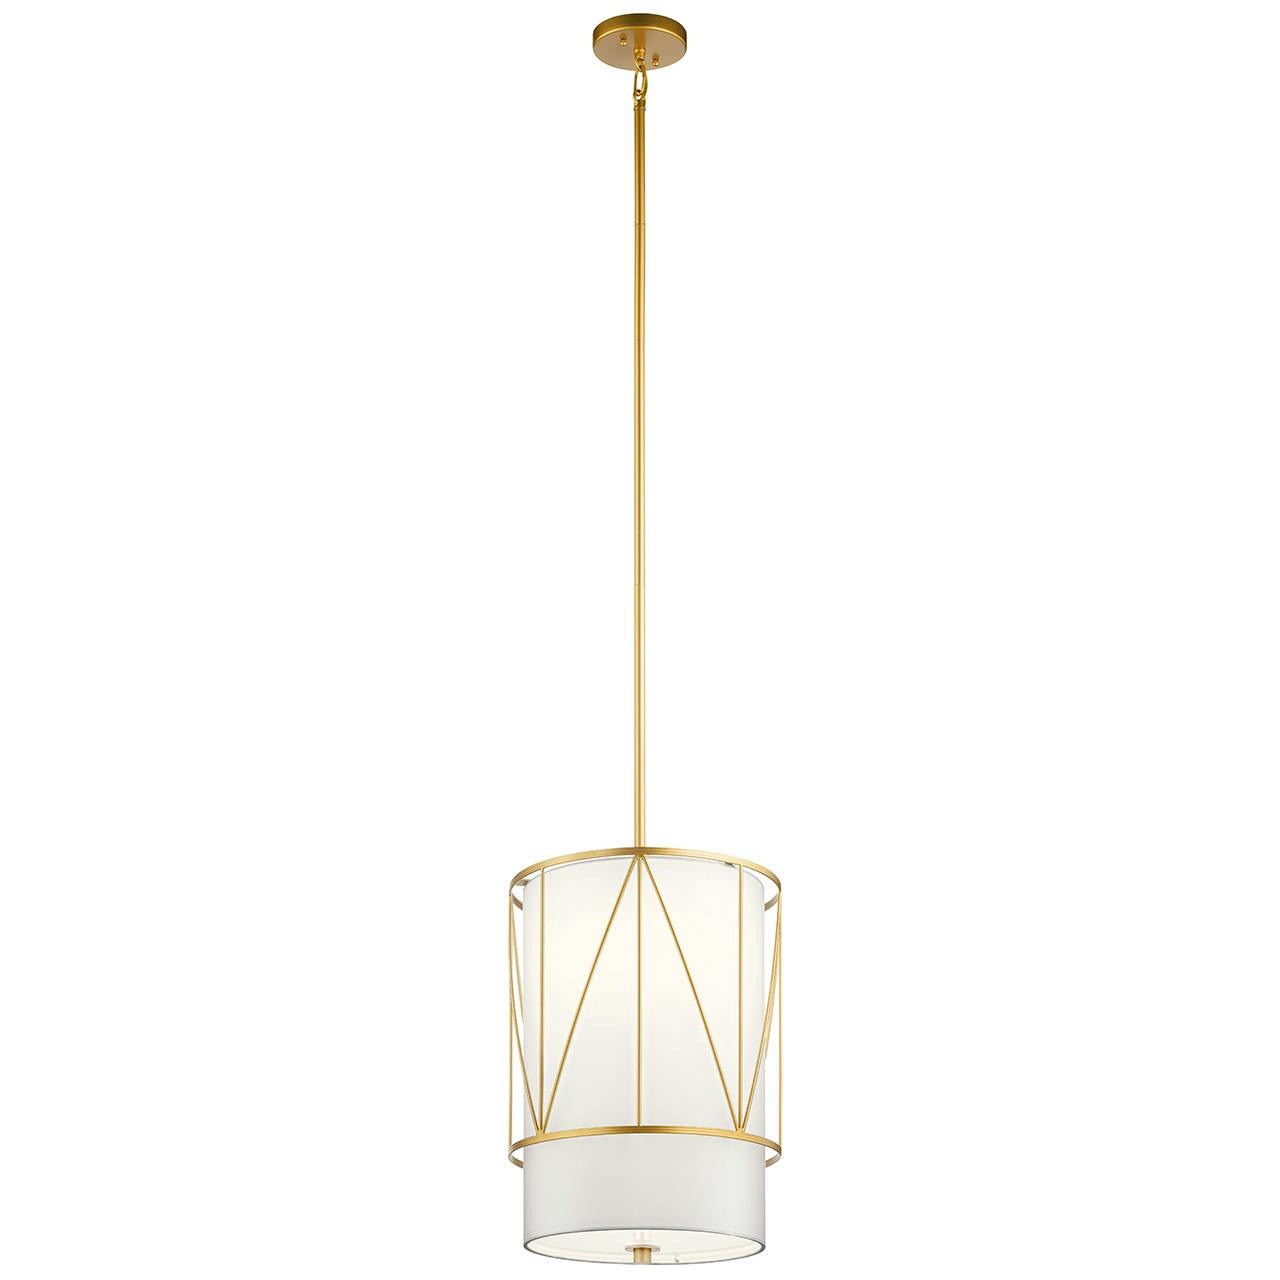 Birkleigh™ 18.25" Pendant Classic Gold on a white background